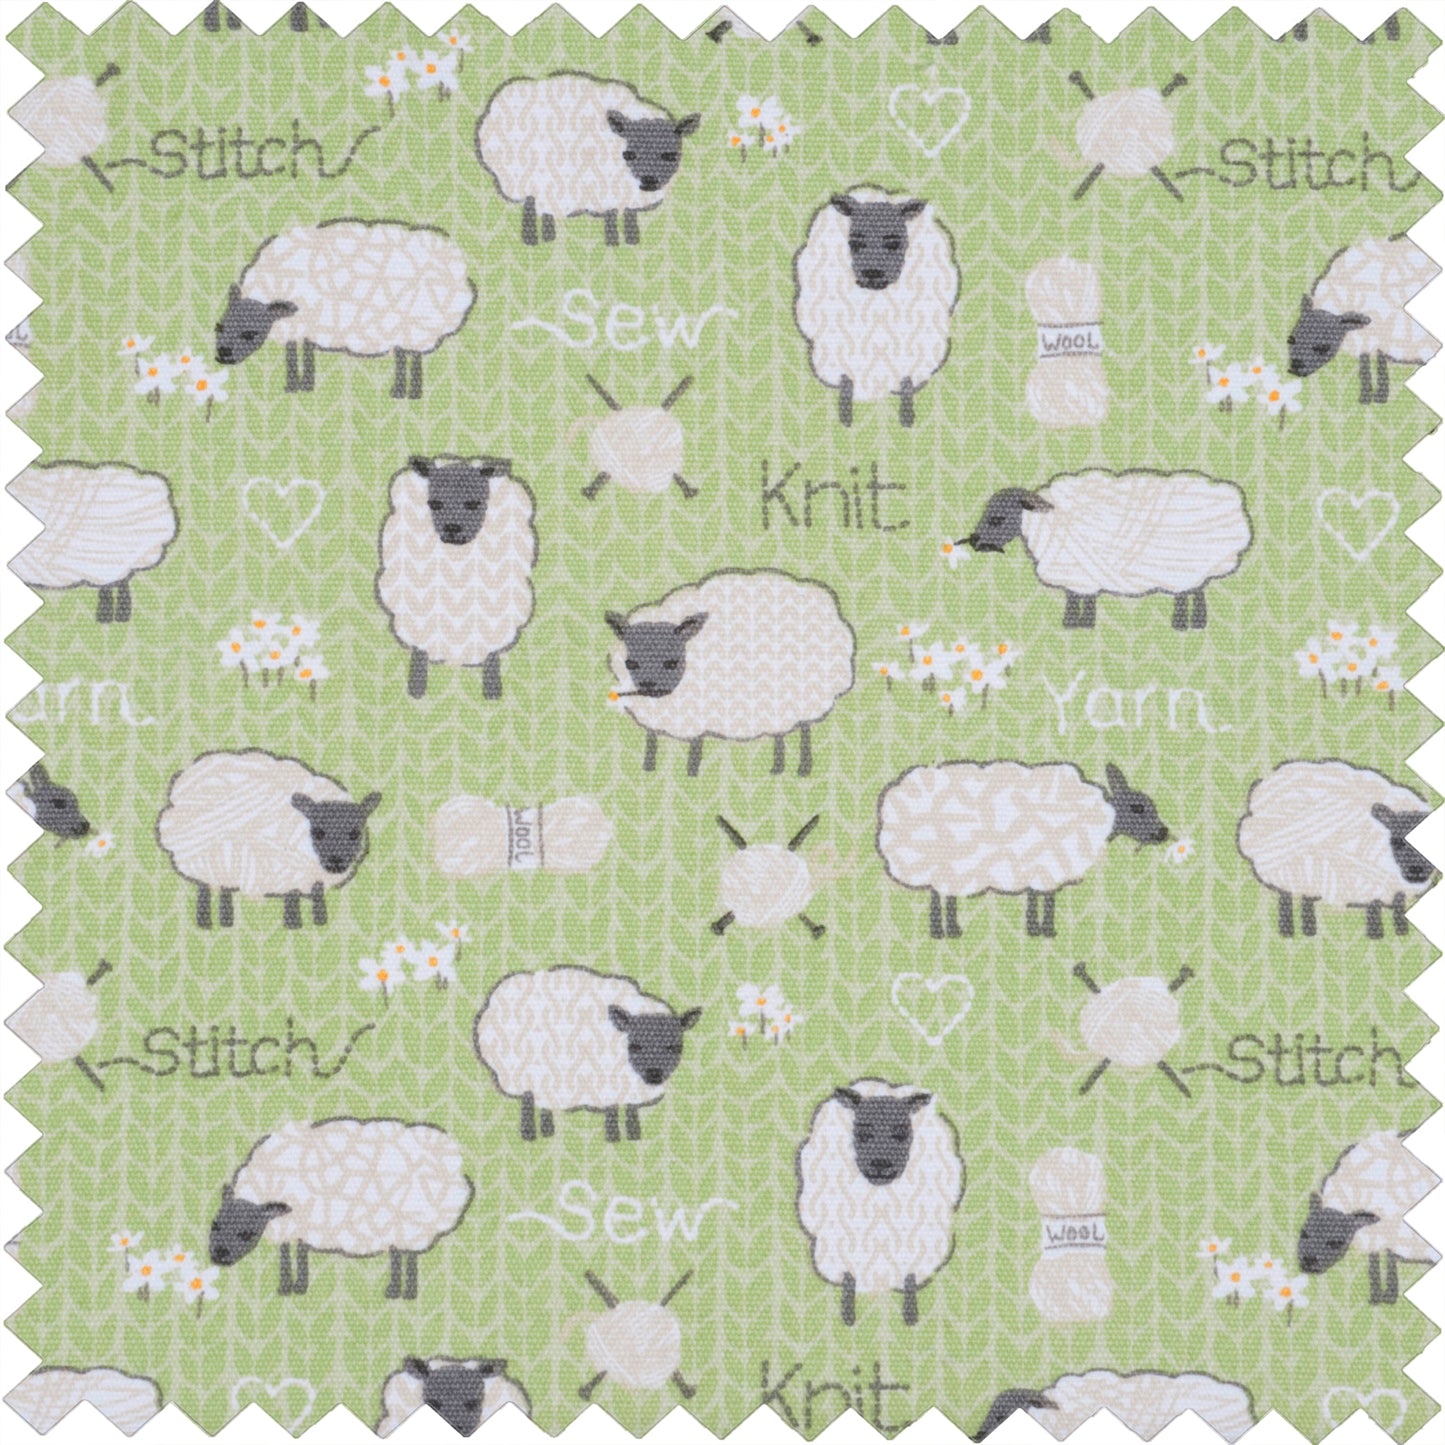 Hobby Gift Sewing Box Square Twin Lid Sheep Design